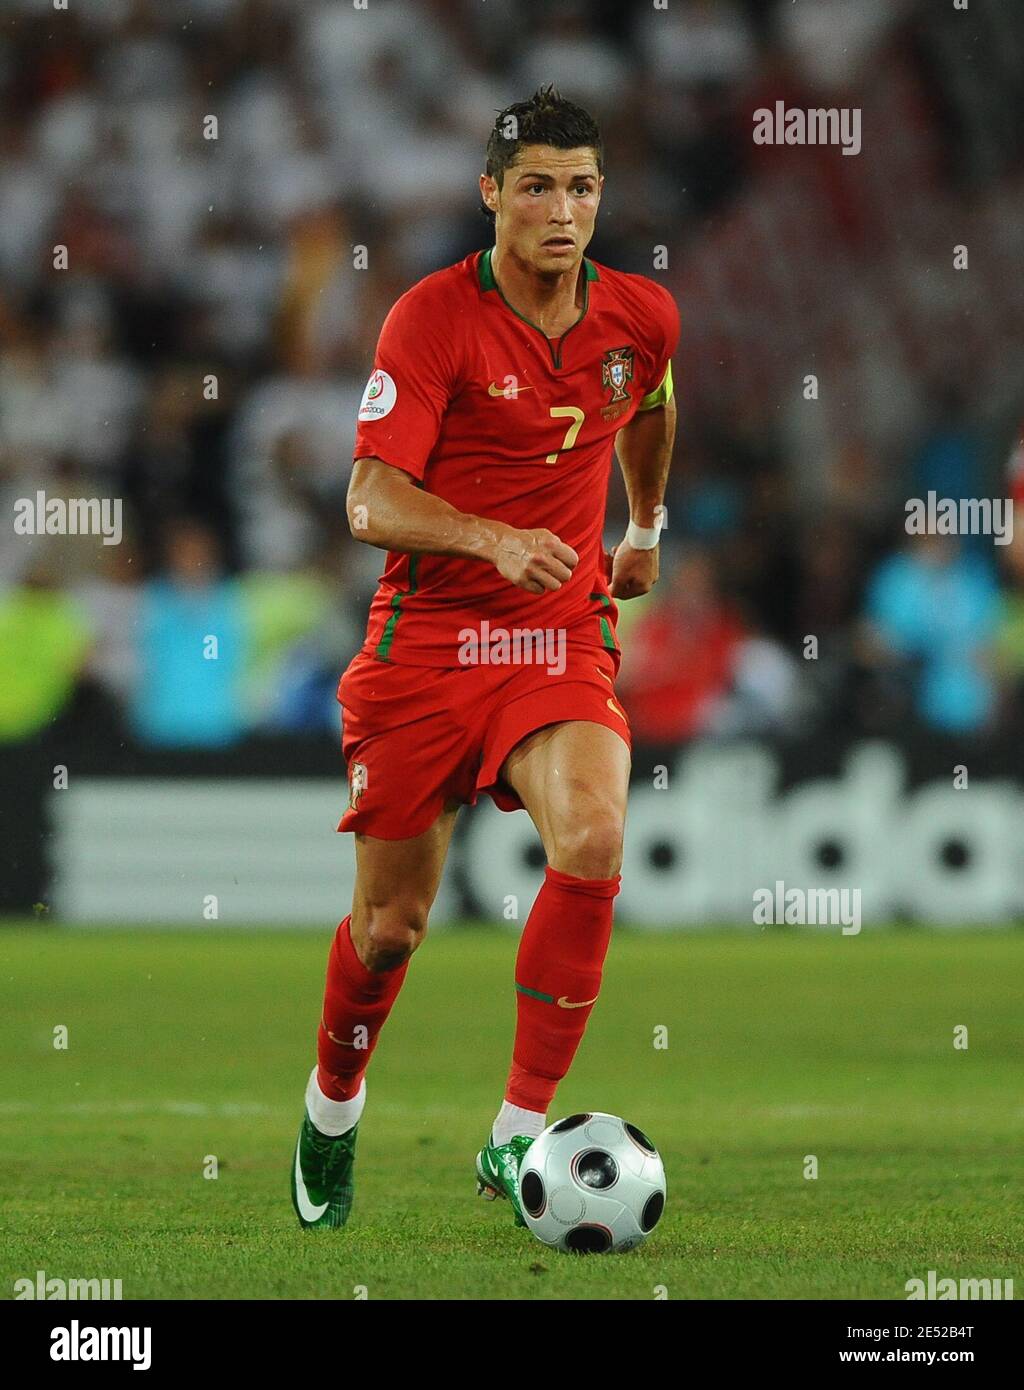 Portugal's Cristiano Ronaldo during the Euro 2008, UEFA European  Championship quarter final match, Portugal vs Germany at the St. Jakob-Park  stadium in Basel, Switzerland on June 19, 2008. Germany won 3-2. Photo